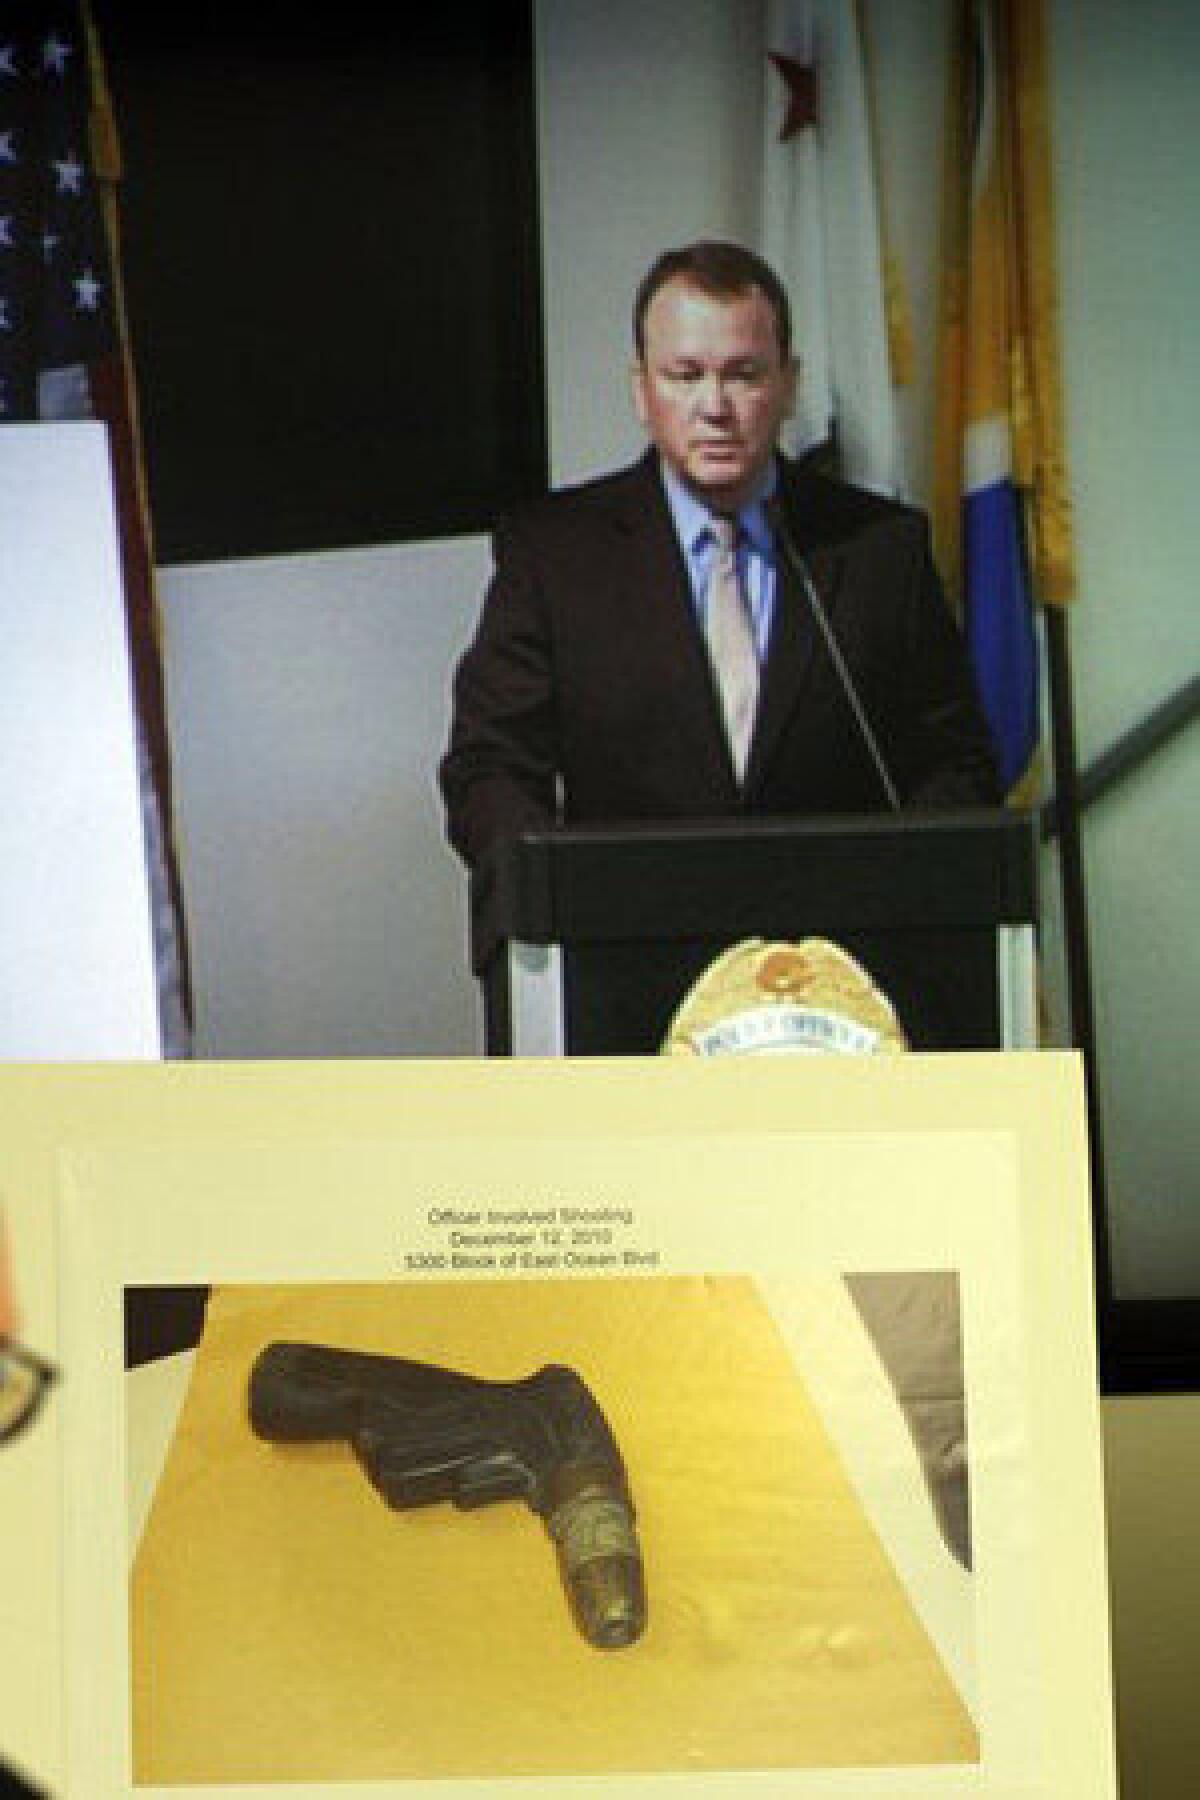 At a March 2011 news conference, Long Beach Police Chief Jim McDonnell displays a photo of the garden hose nozzle Douglas Zerby was holding when he was shot to death by police.